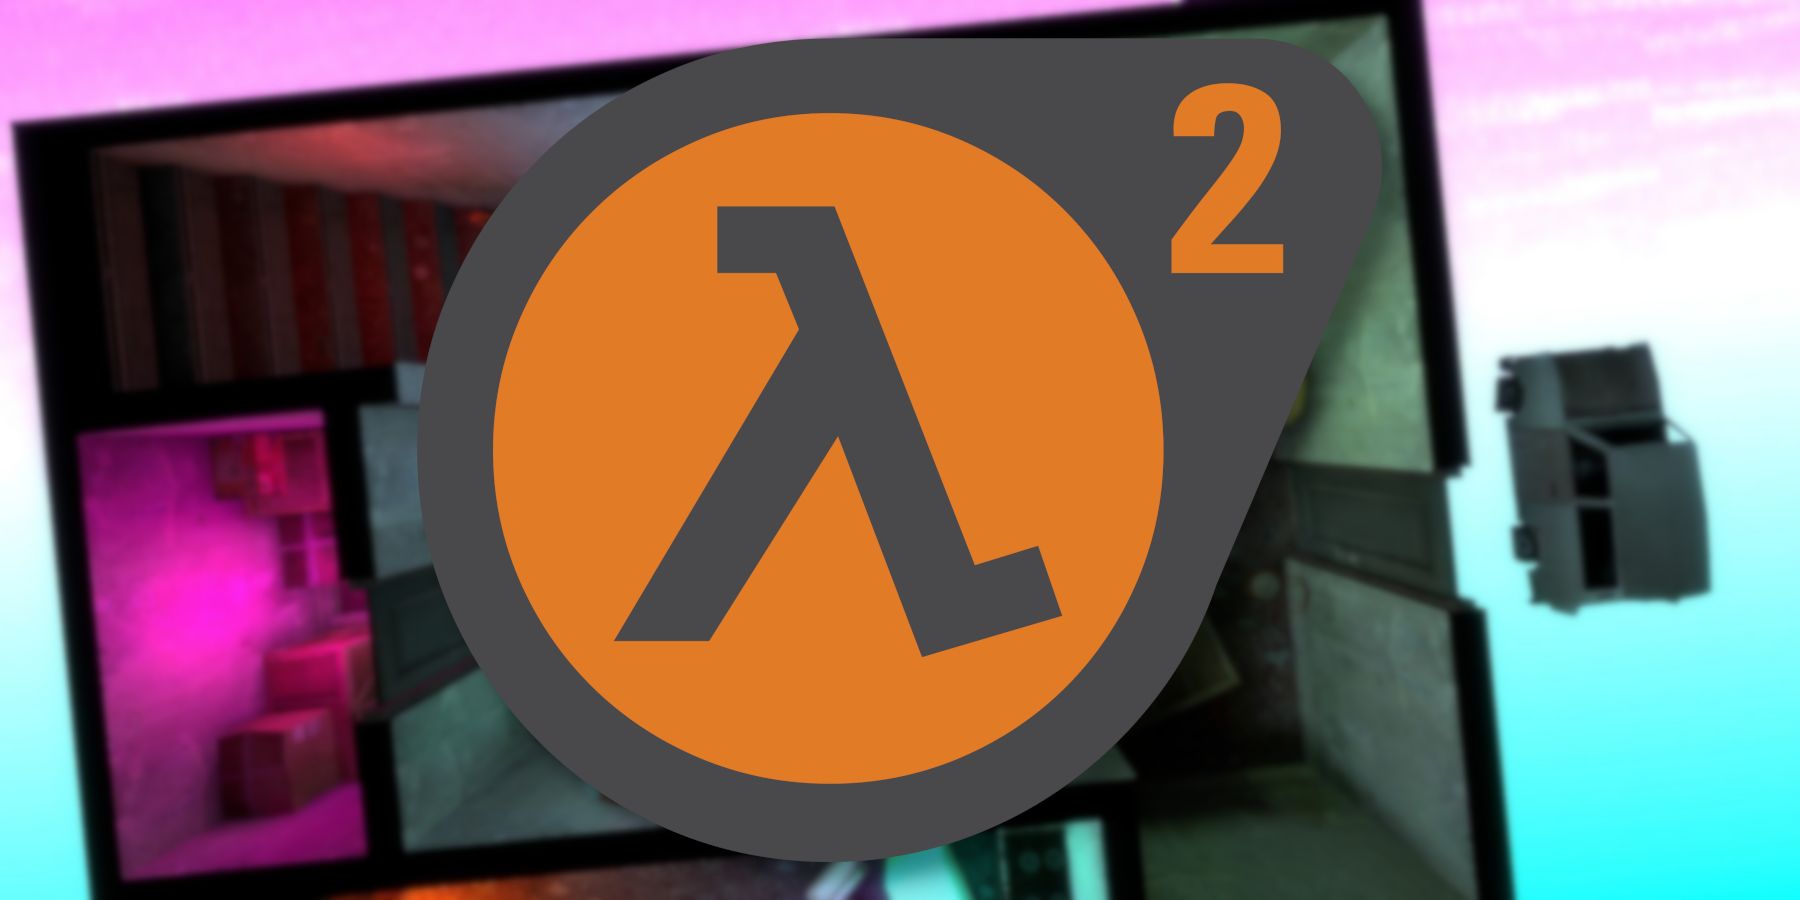 The Half-Life 2 logo with a top-down view of a map in the background.